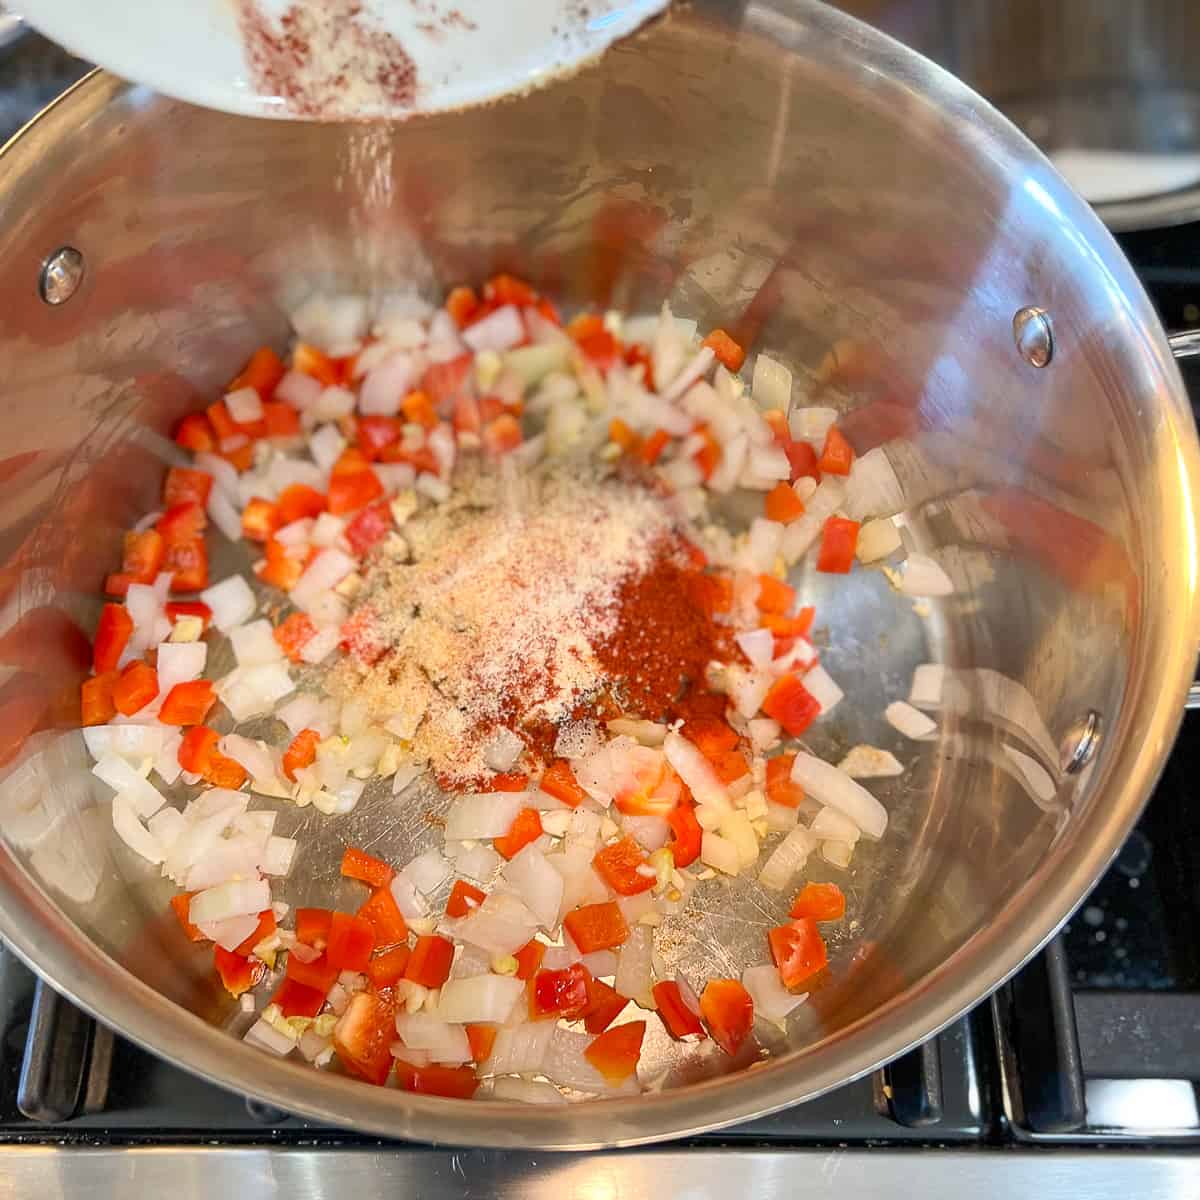 top side view of spices being added to the pot with veggies